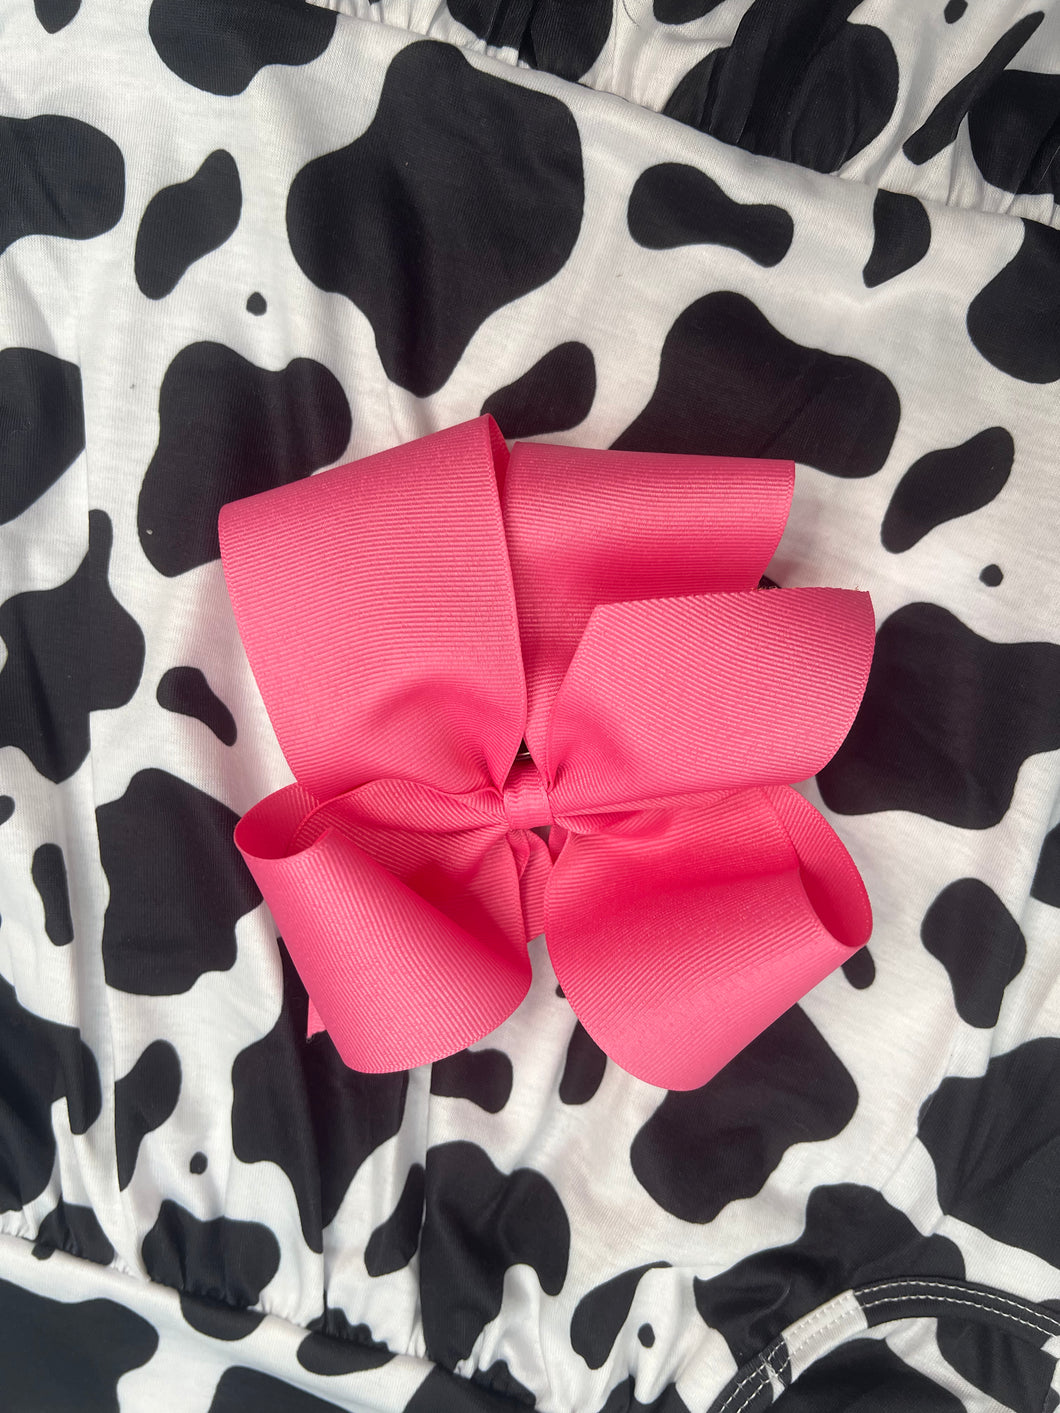 Hot Pink XL French Bow